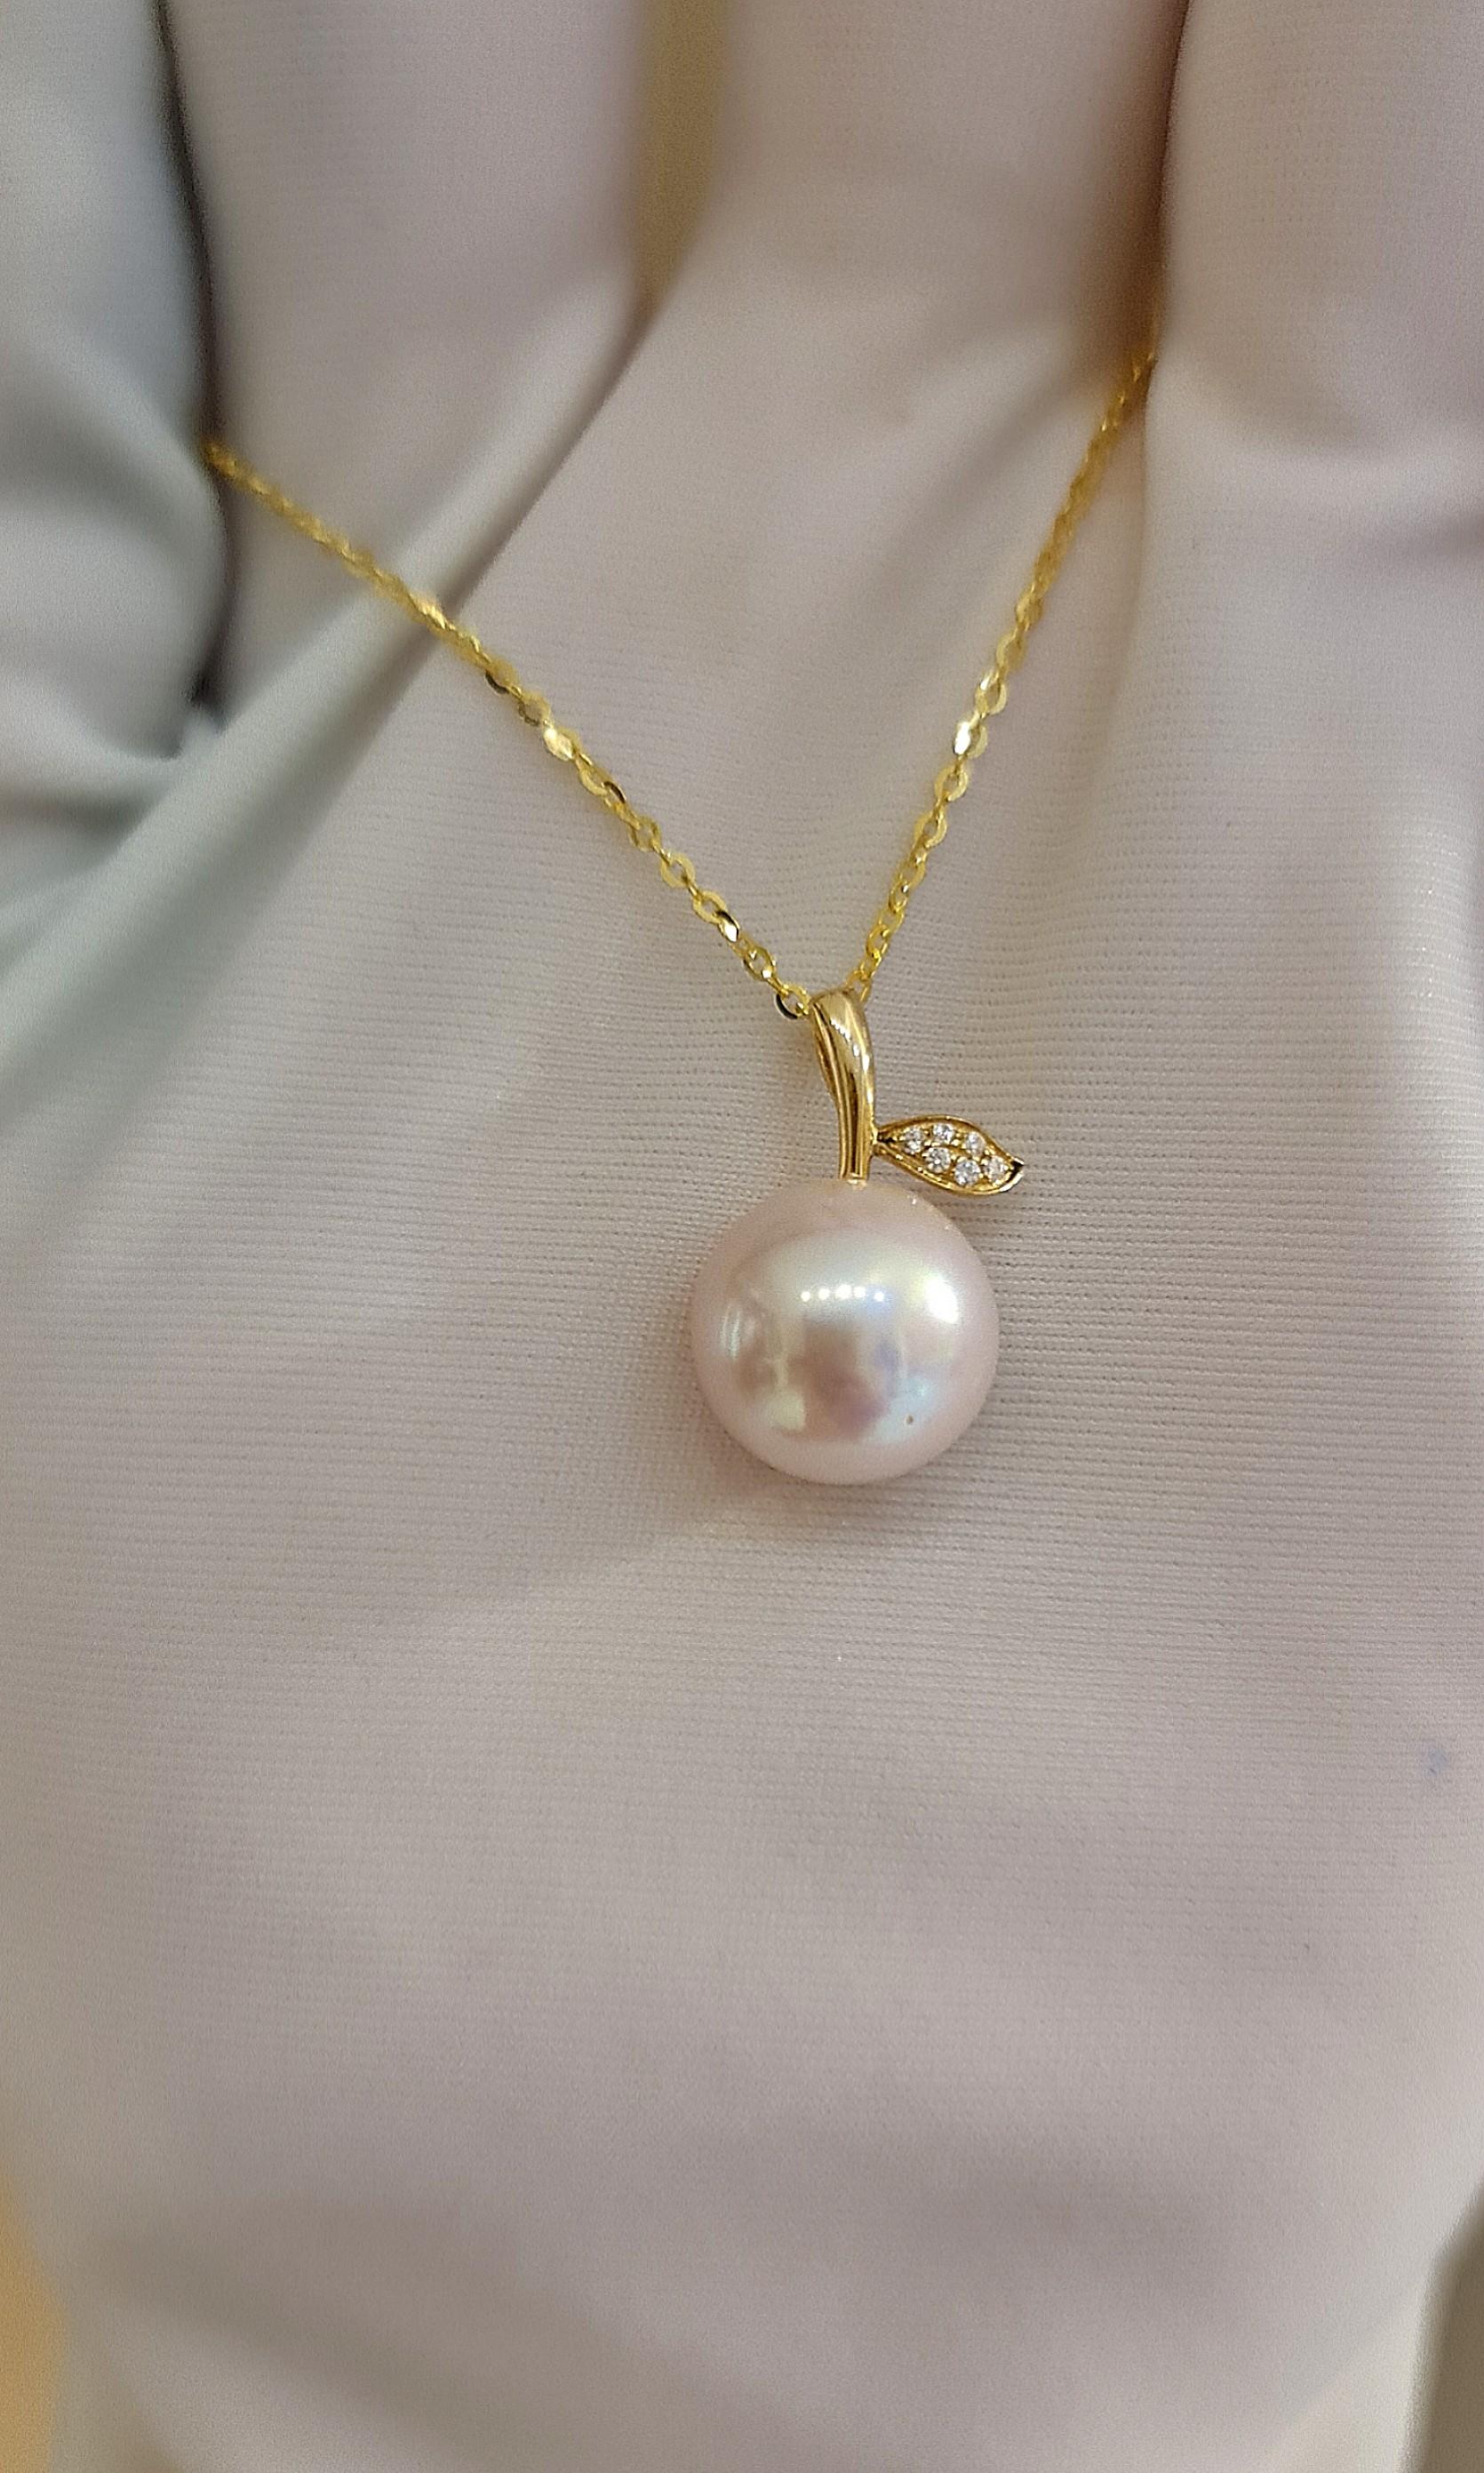 Pearl Necklace with Diamond Charm- SOLD - Sholdt Jewelry Design